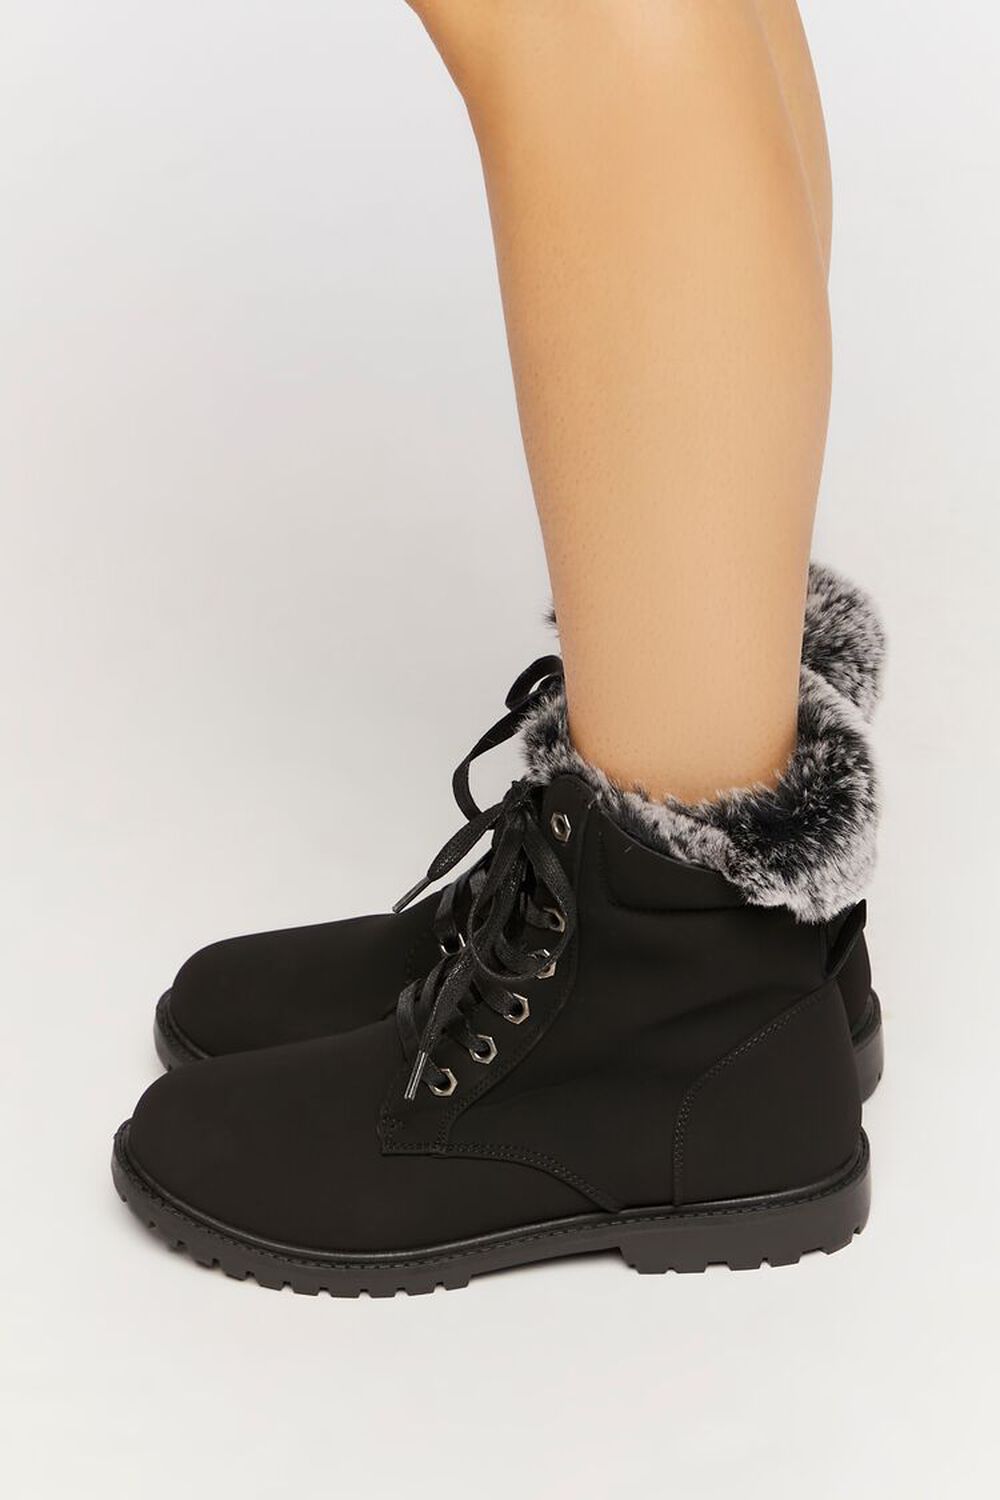 BLACK Faux Fur-Lined Ankle Booties, image 2